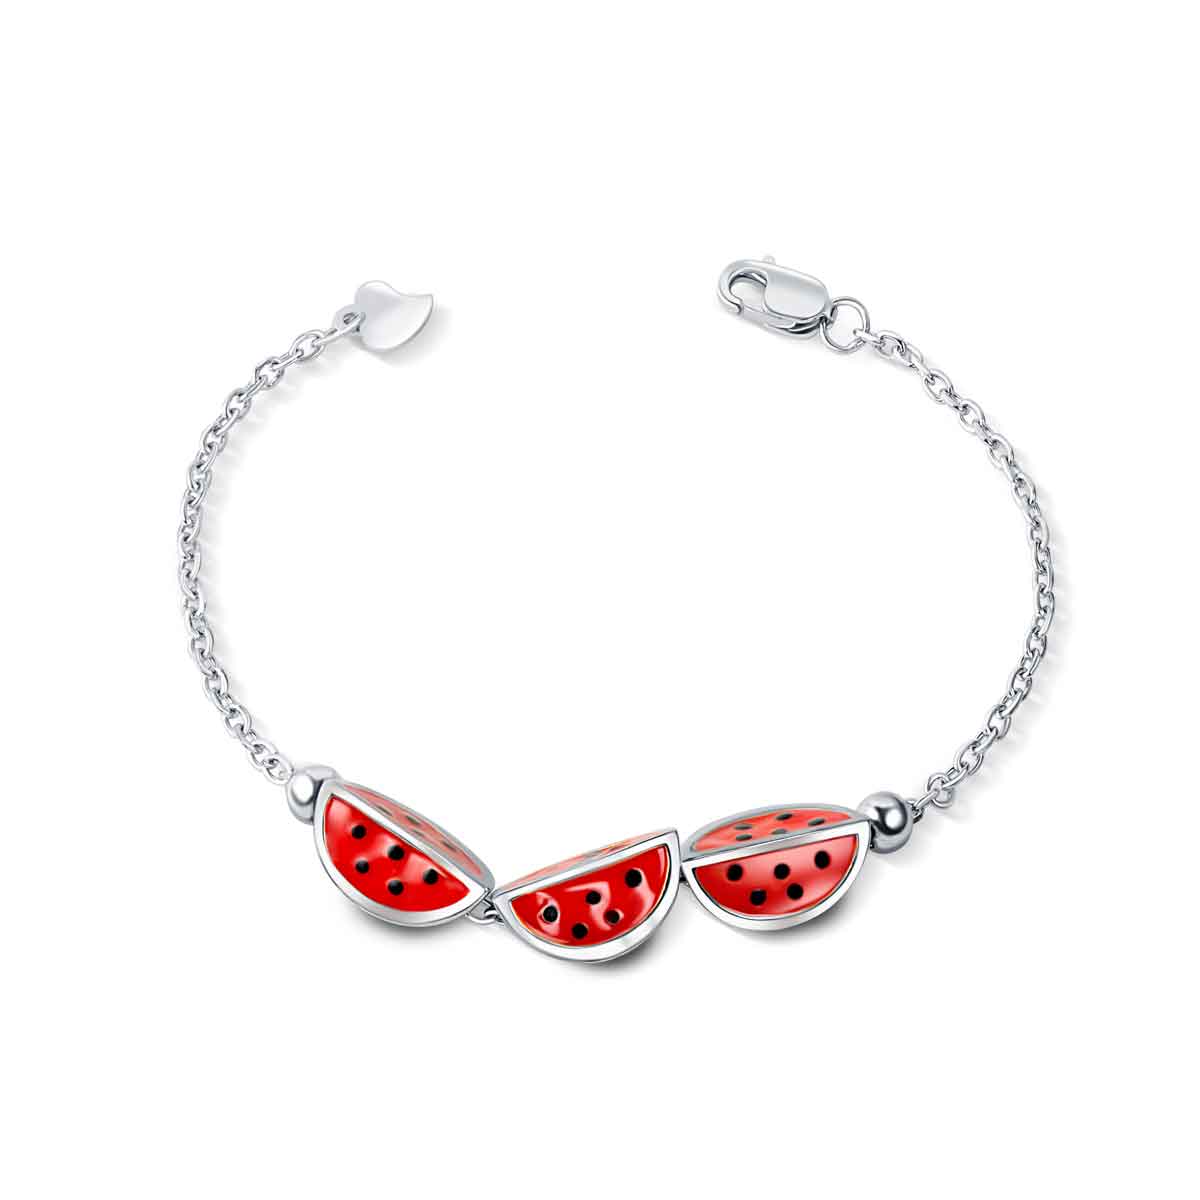 This Yummy Watermelon Sterling Silver Bracelet is crafted with 925 sterling silver for a durable and high-quality accessory for your baby. Its delicate design and charming watermelon details make it a perfect addition to any outfit. Give your little one a stylish and safe bracelet to wear.